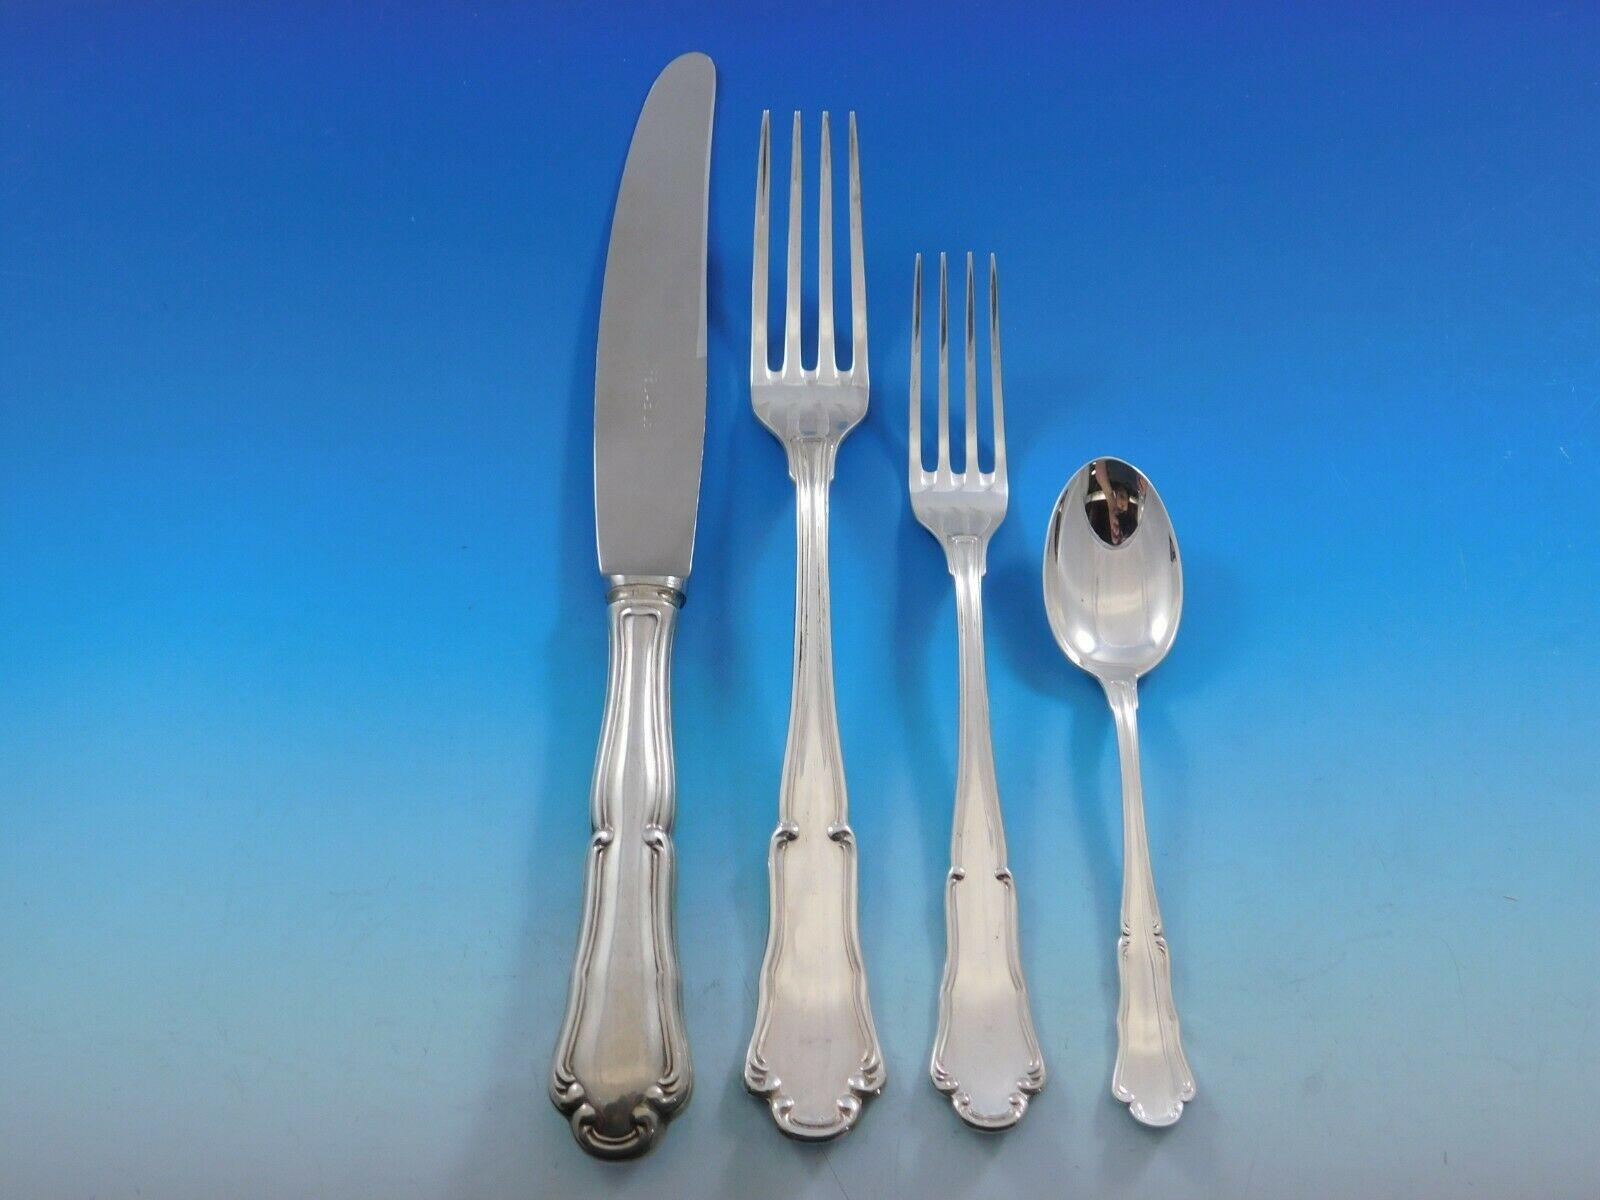 Outstanding dinner size Barocco by Zaramella Argenti (same pattern as Barocco by Wallace) Italy 800 silver flatware set, 113 pieces. This set includes:

24 dinner size knives, 10